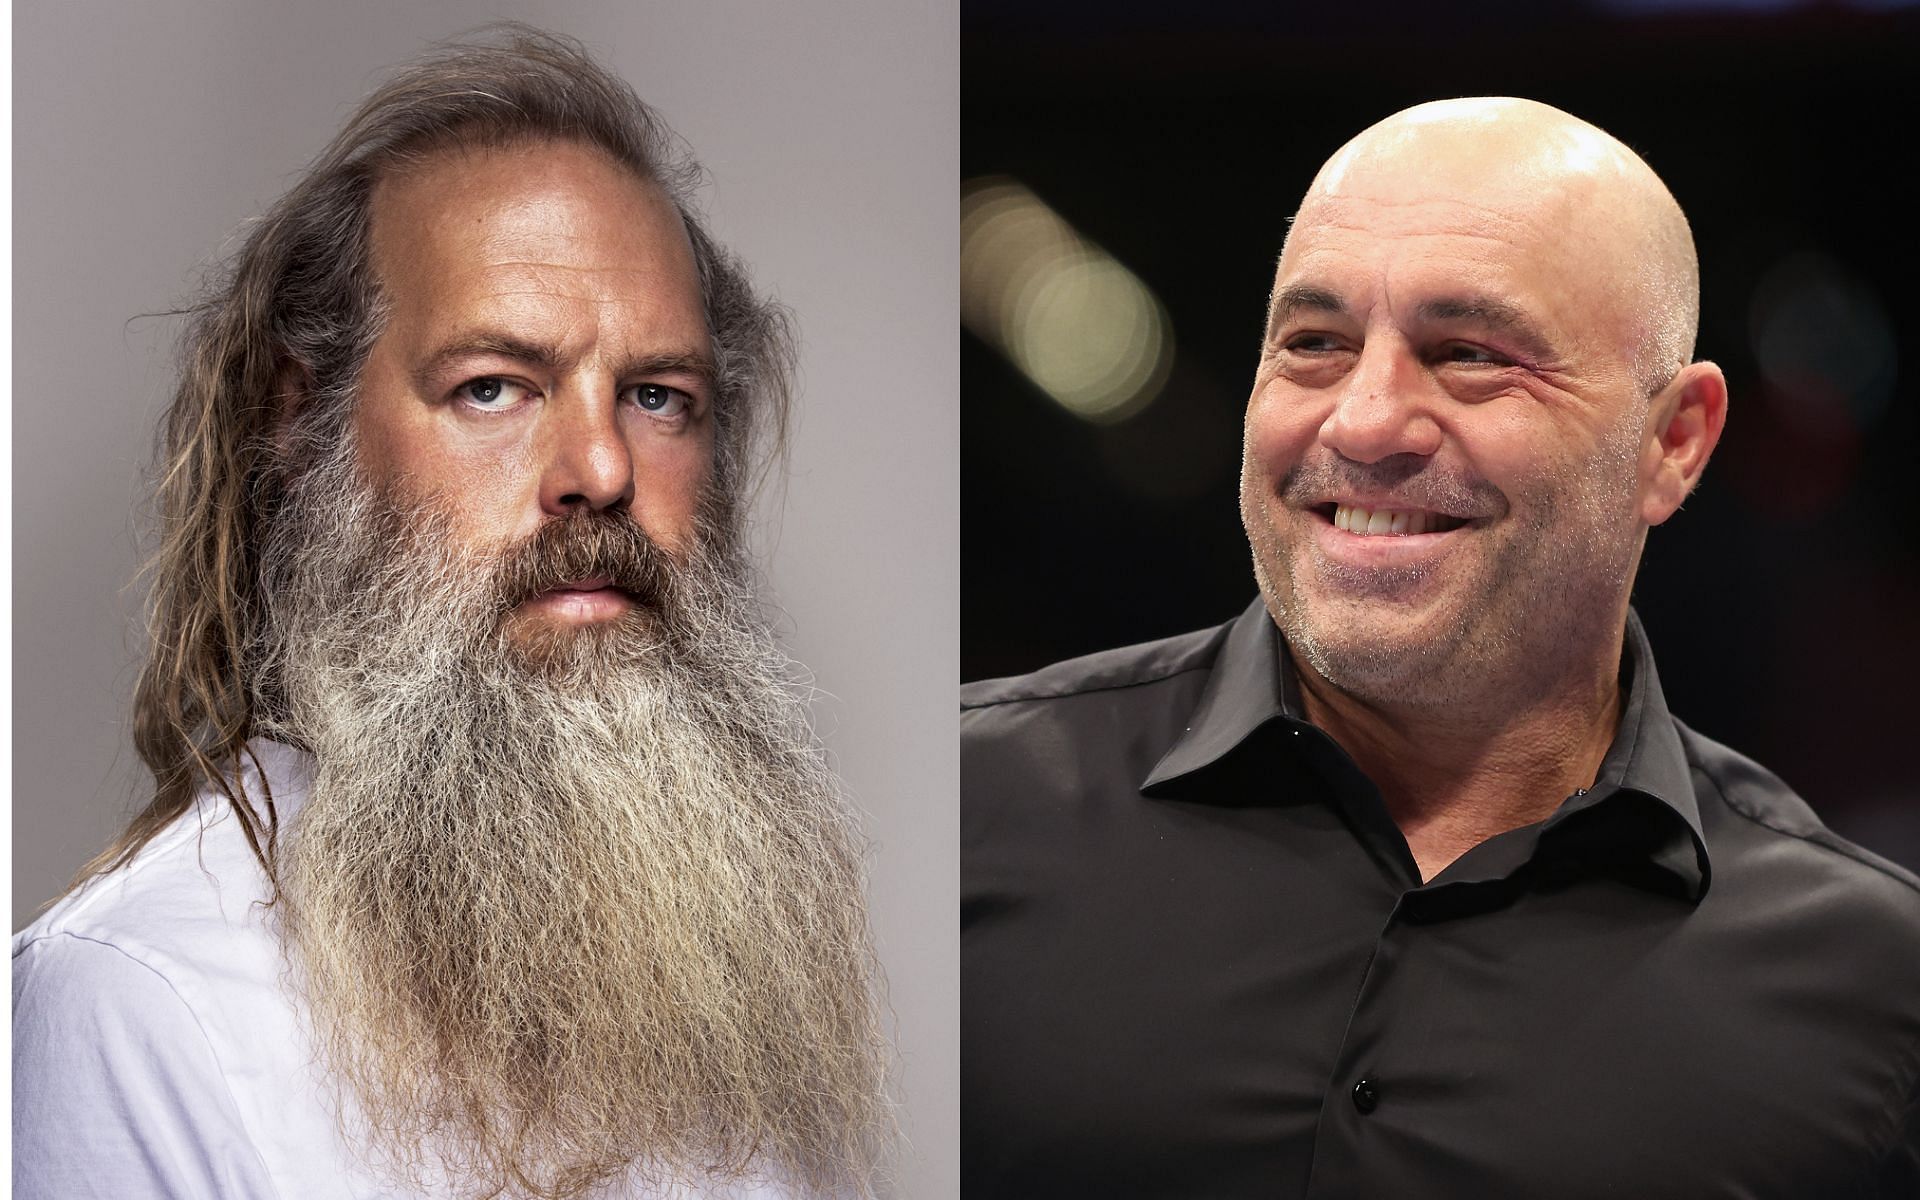 Rick Rubin (left) and Joe Rogan (right). [Images courtesy: left image from Christian Weber and right image from Getty Images]